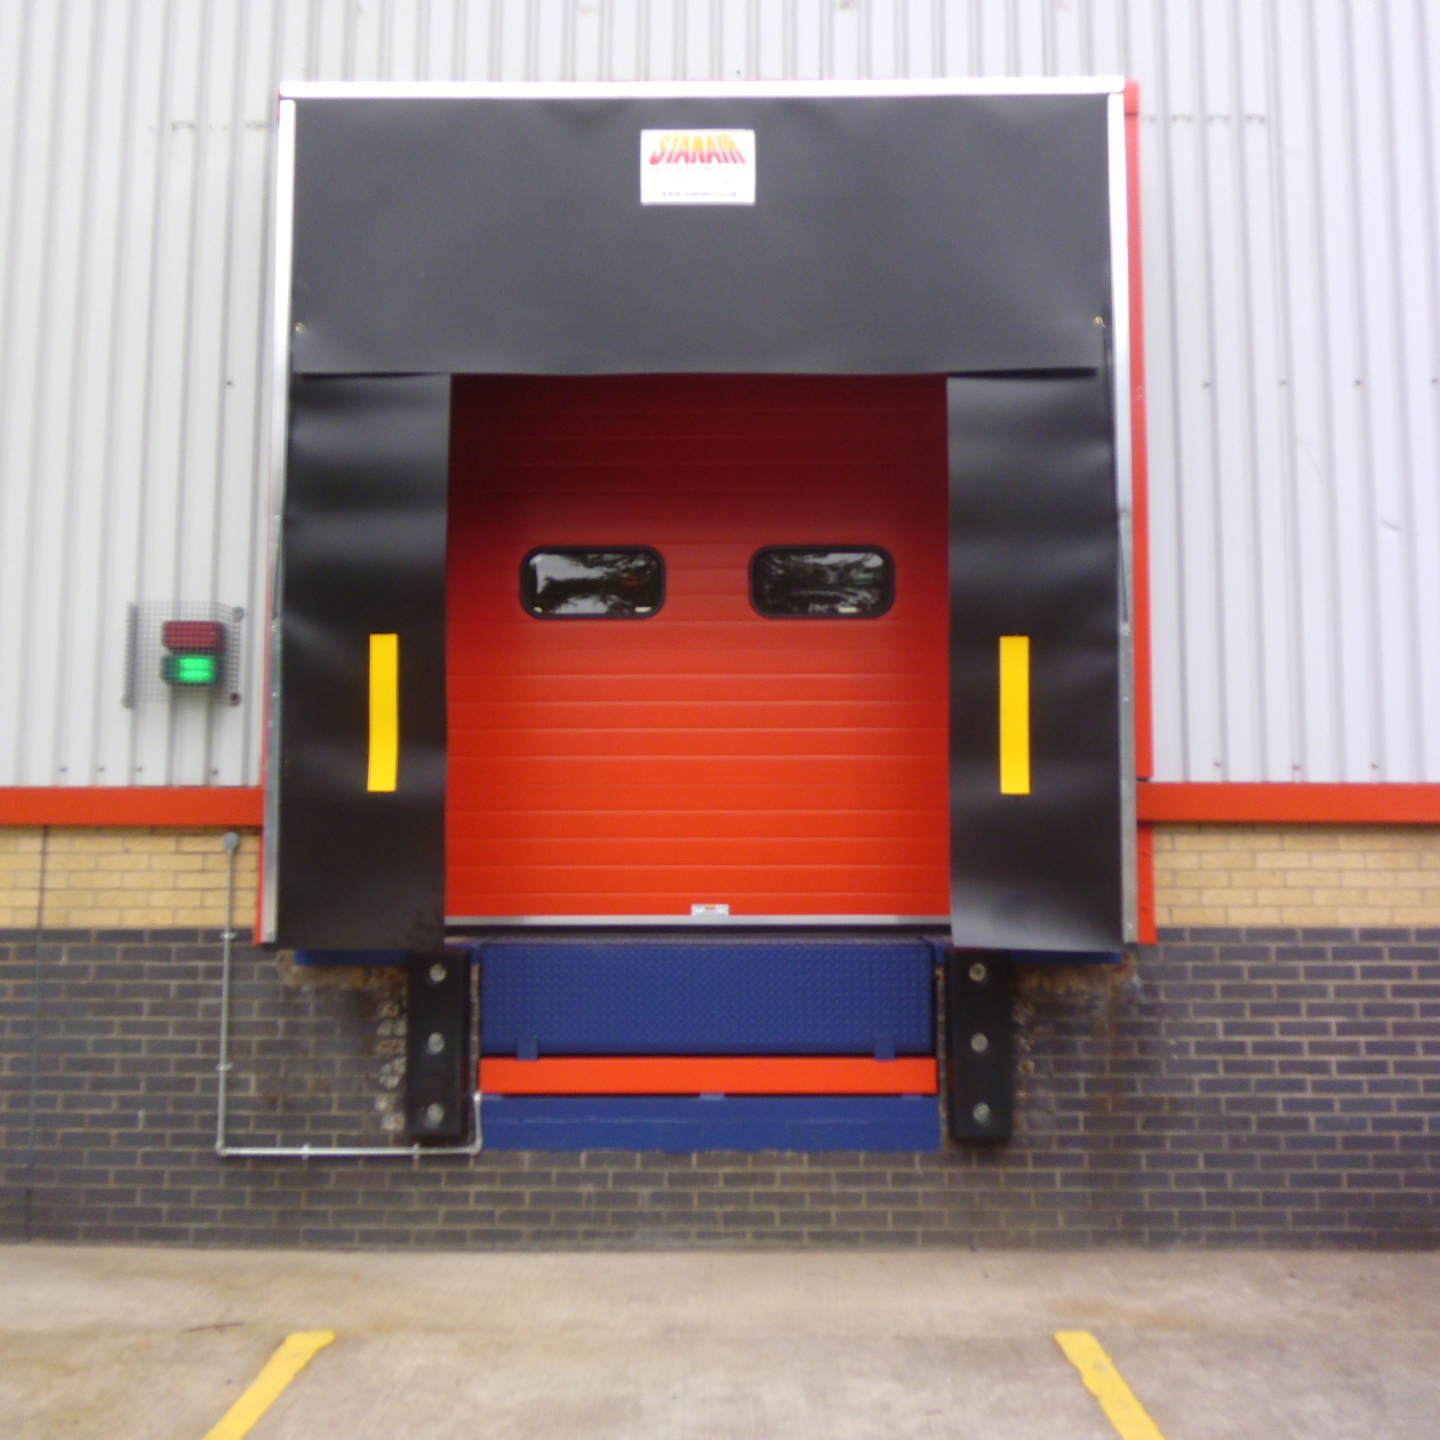 Sectional Overhead door with vision panels alongside Traffic Light System as installed by Stanair Industrial Doors Ltd